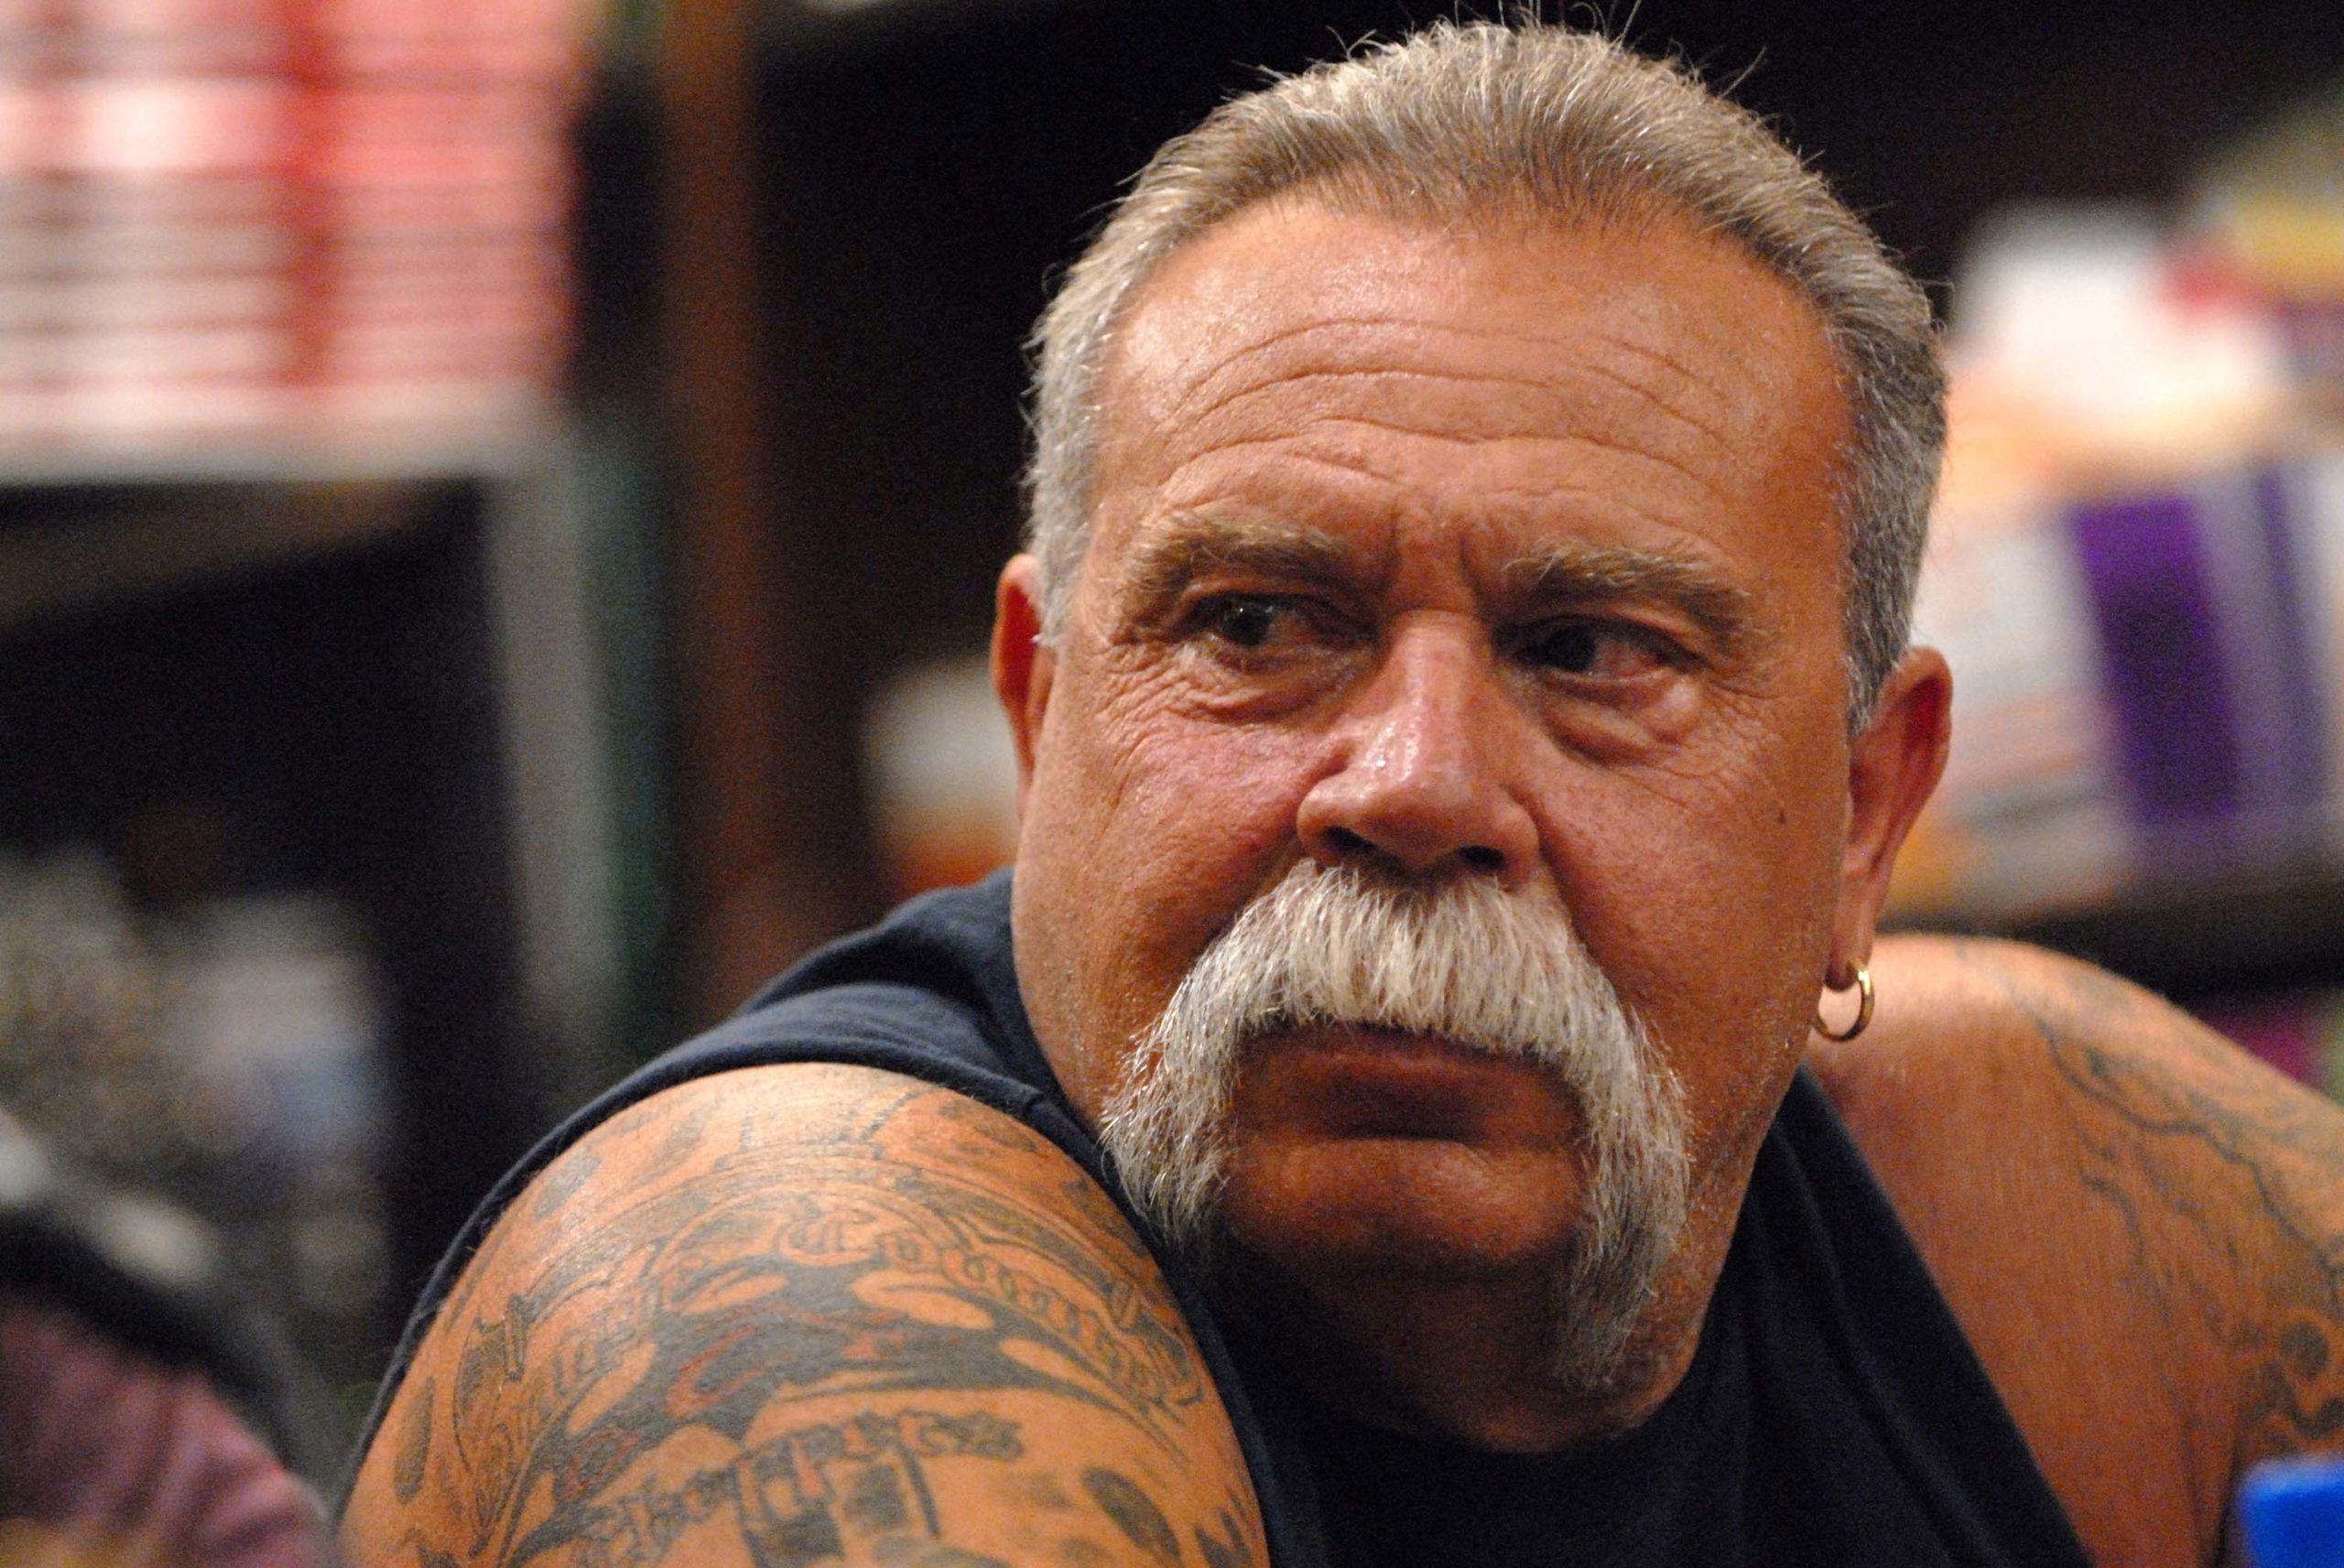 Paul Teutul Sr. from 'American Chopper' Where is the reality star today?